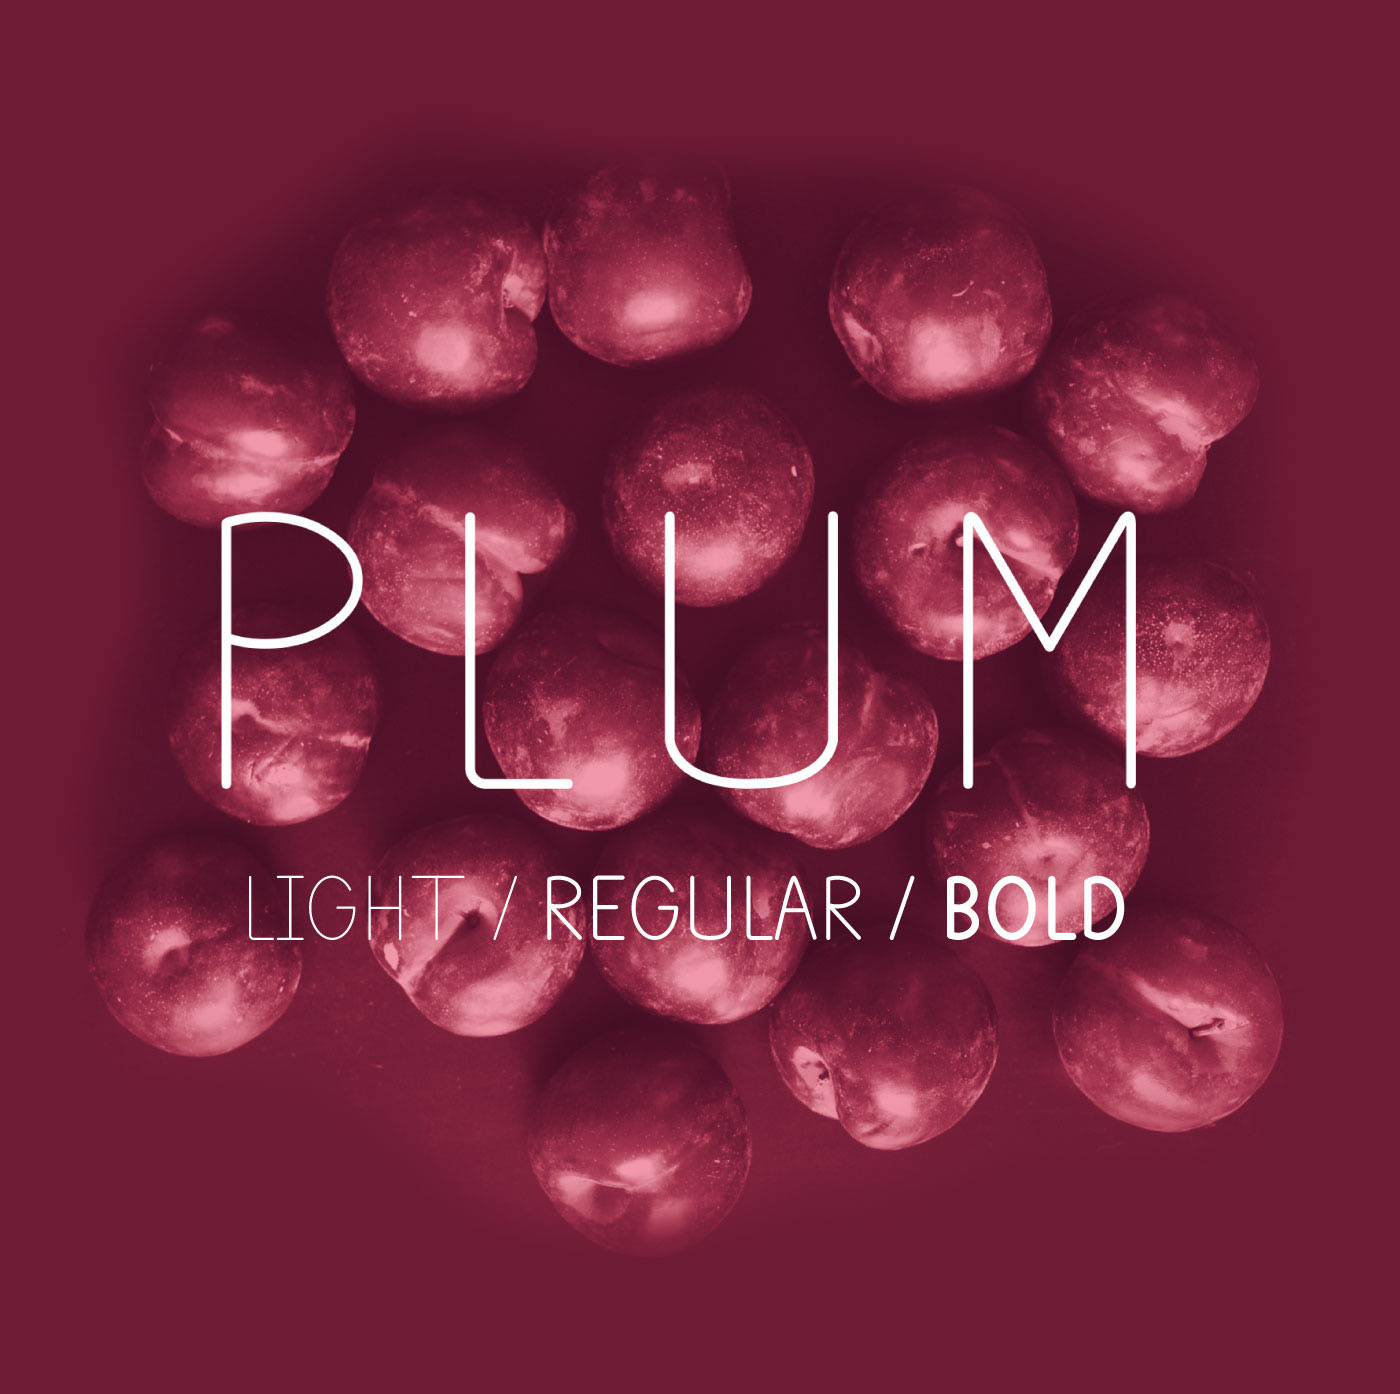 Free font free font Typeface amy cox Amy free typeface Magic   new Plum words image Fun type